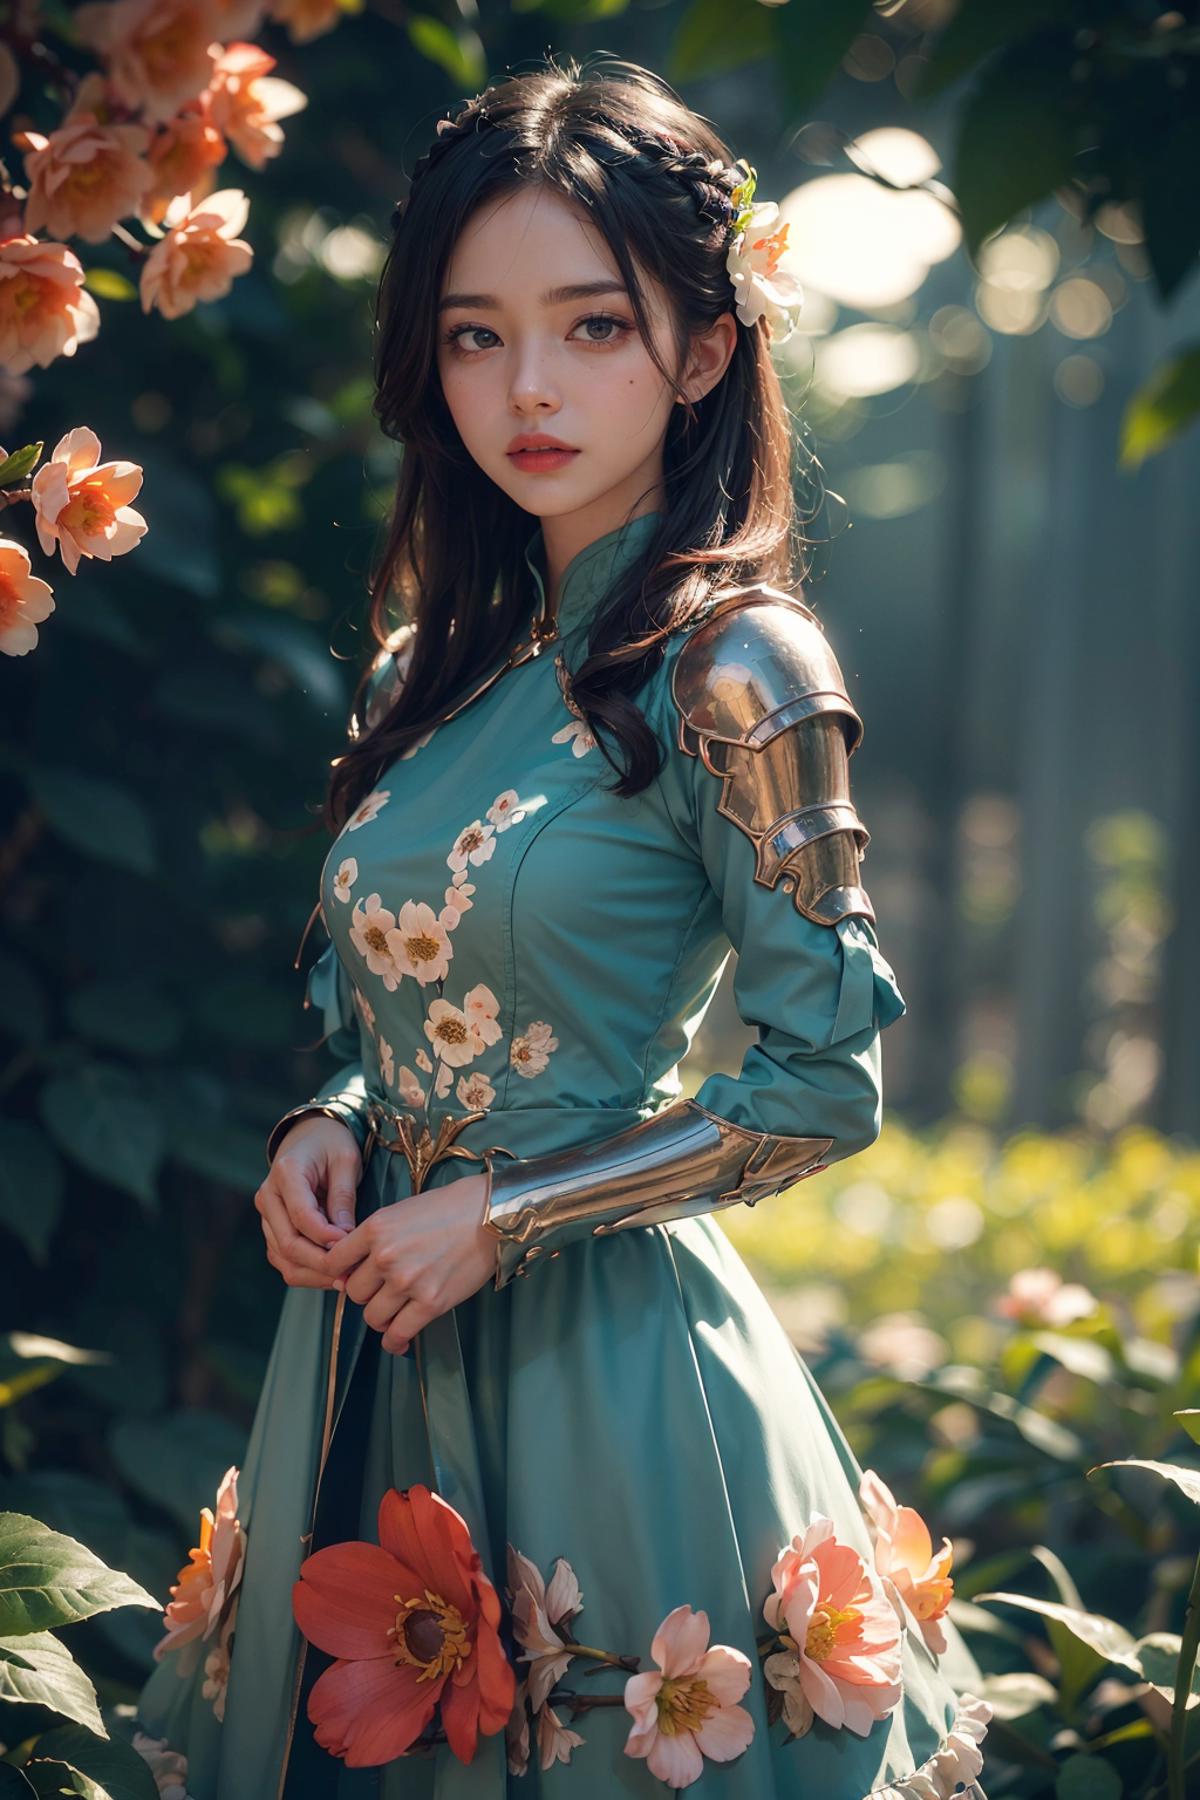 A young woman in a blue dress and metal armor poses near flowers.